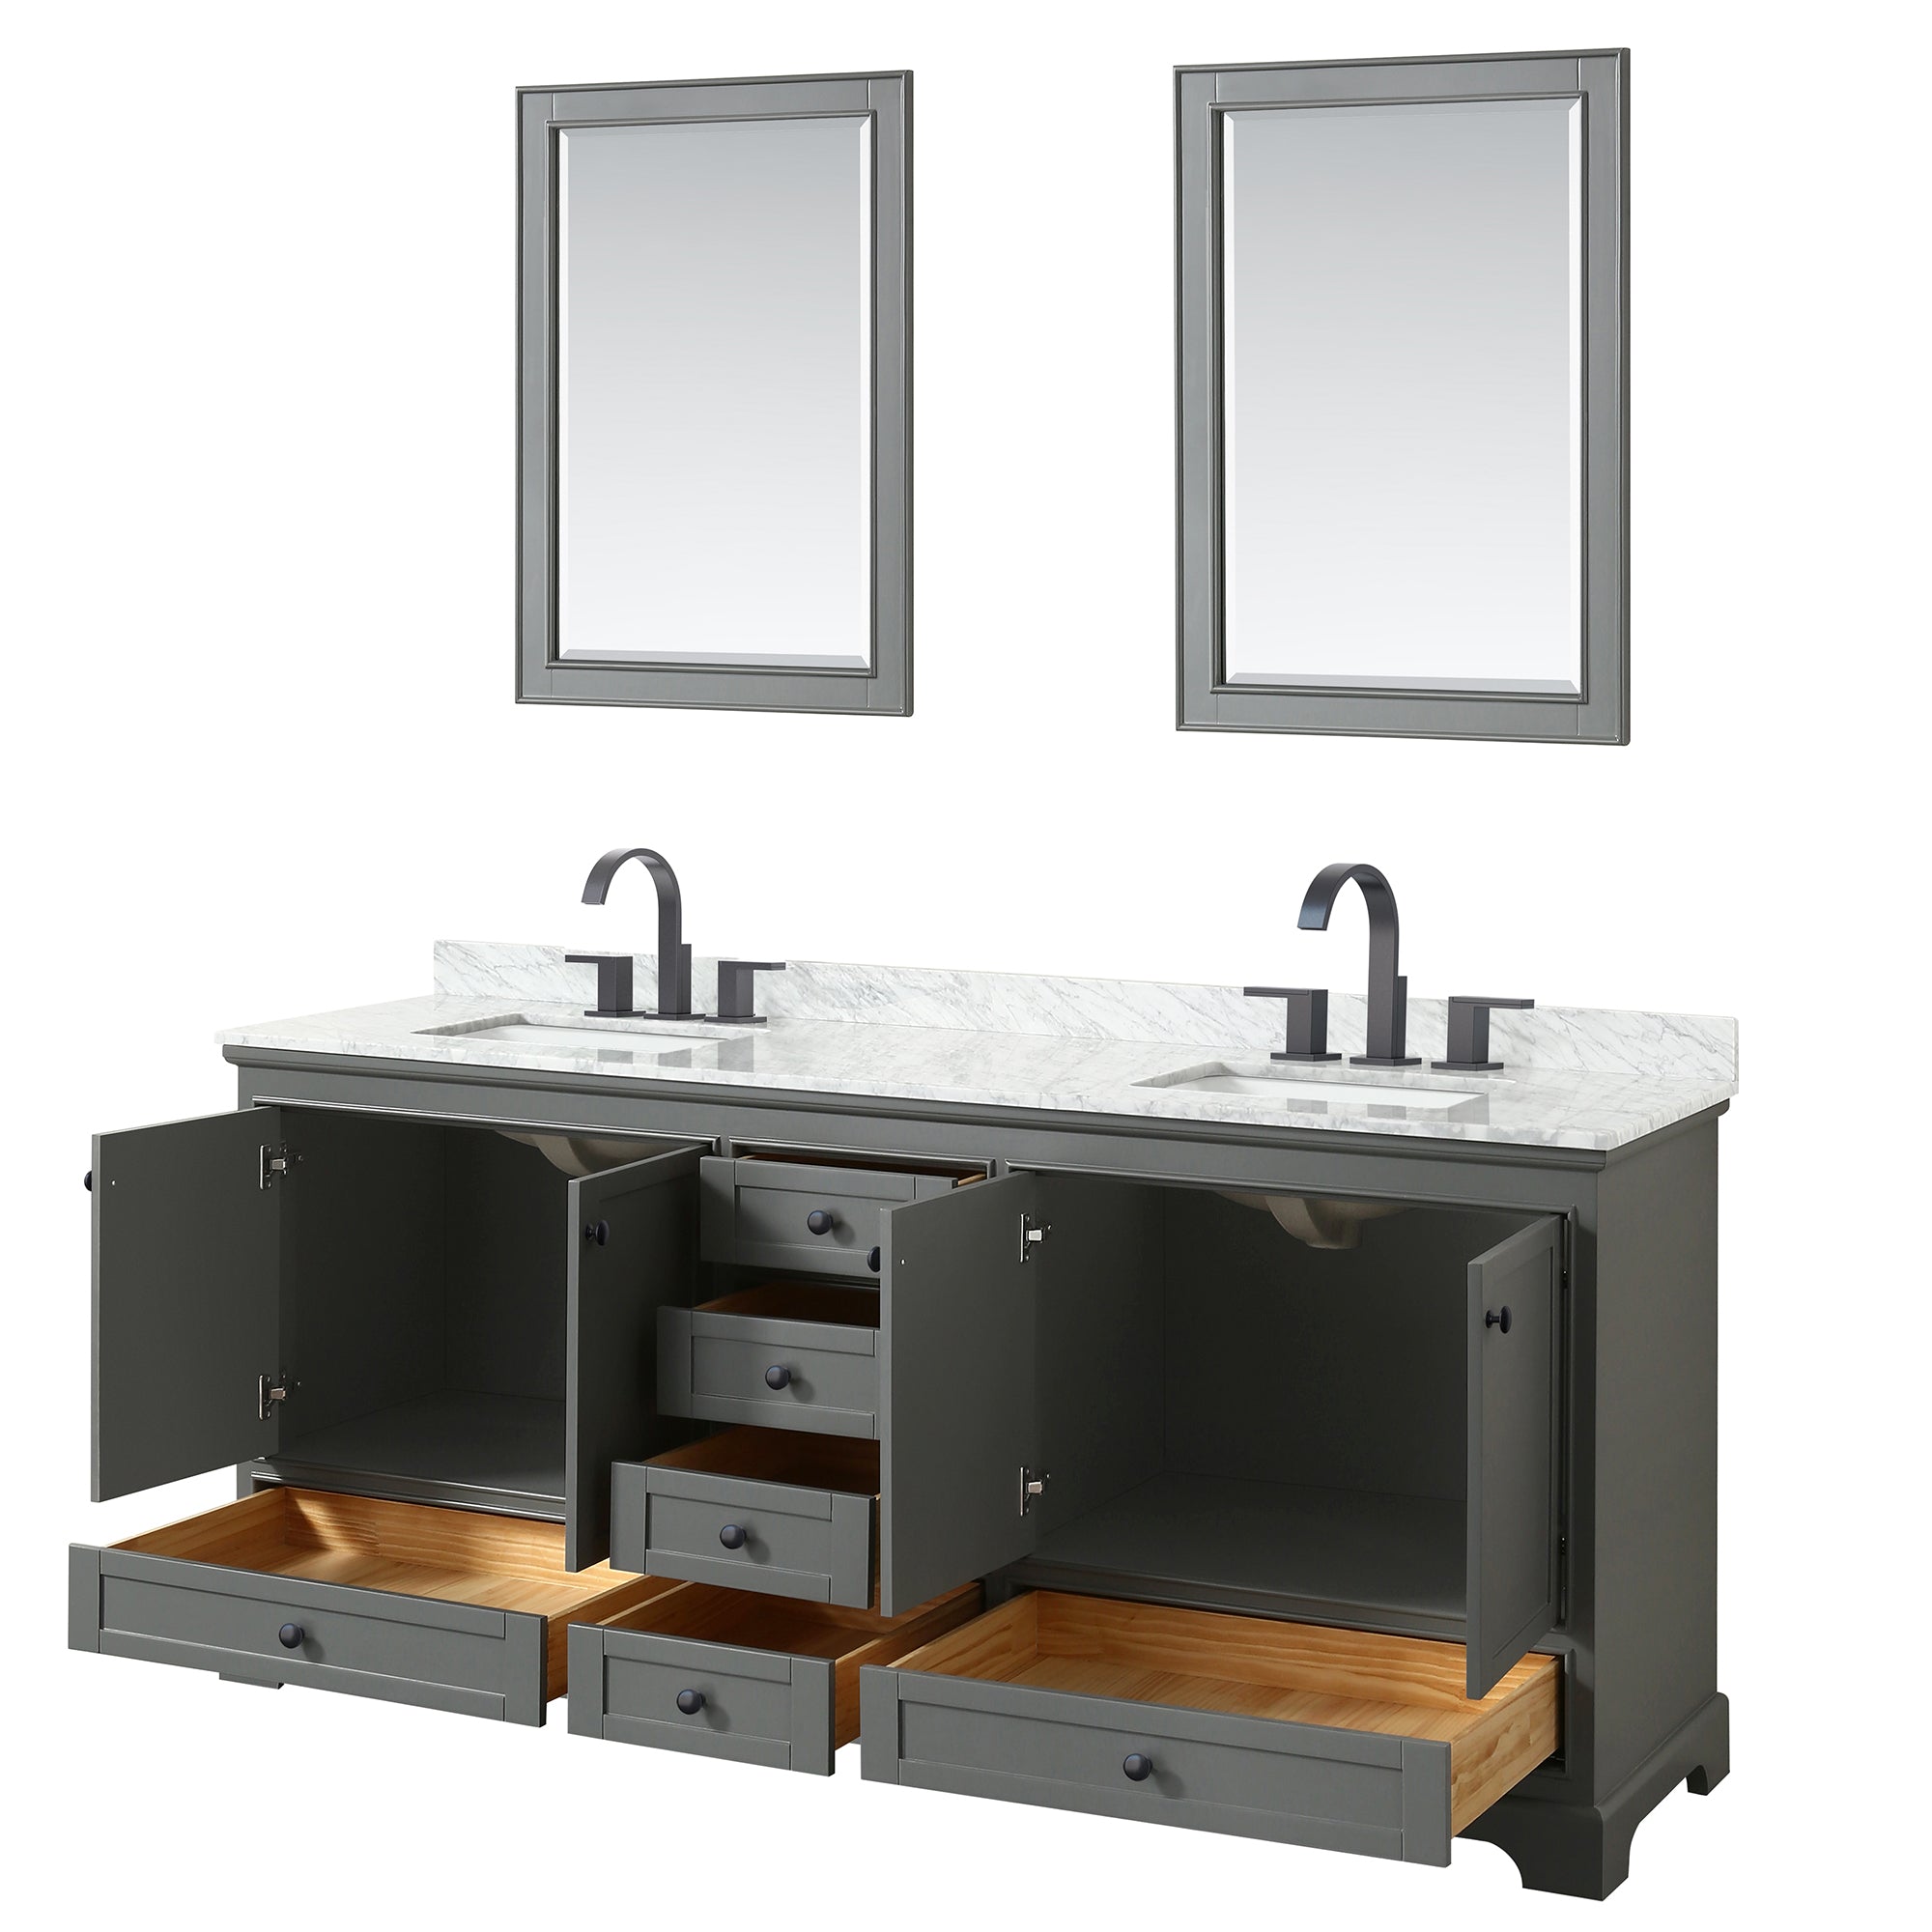 Wyndham Collection Beckett 42 in. W x 22 in. D Single Vanity in